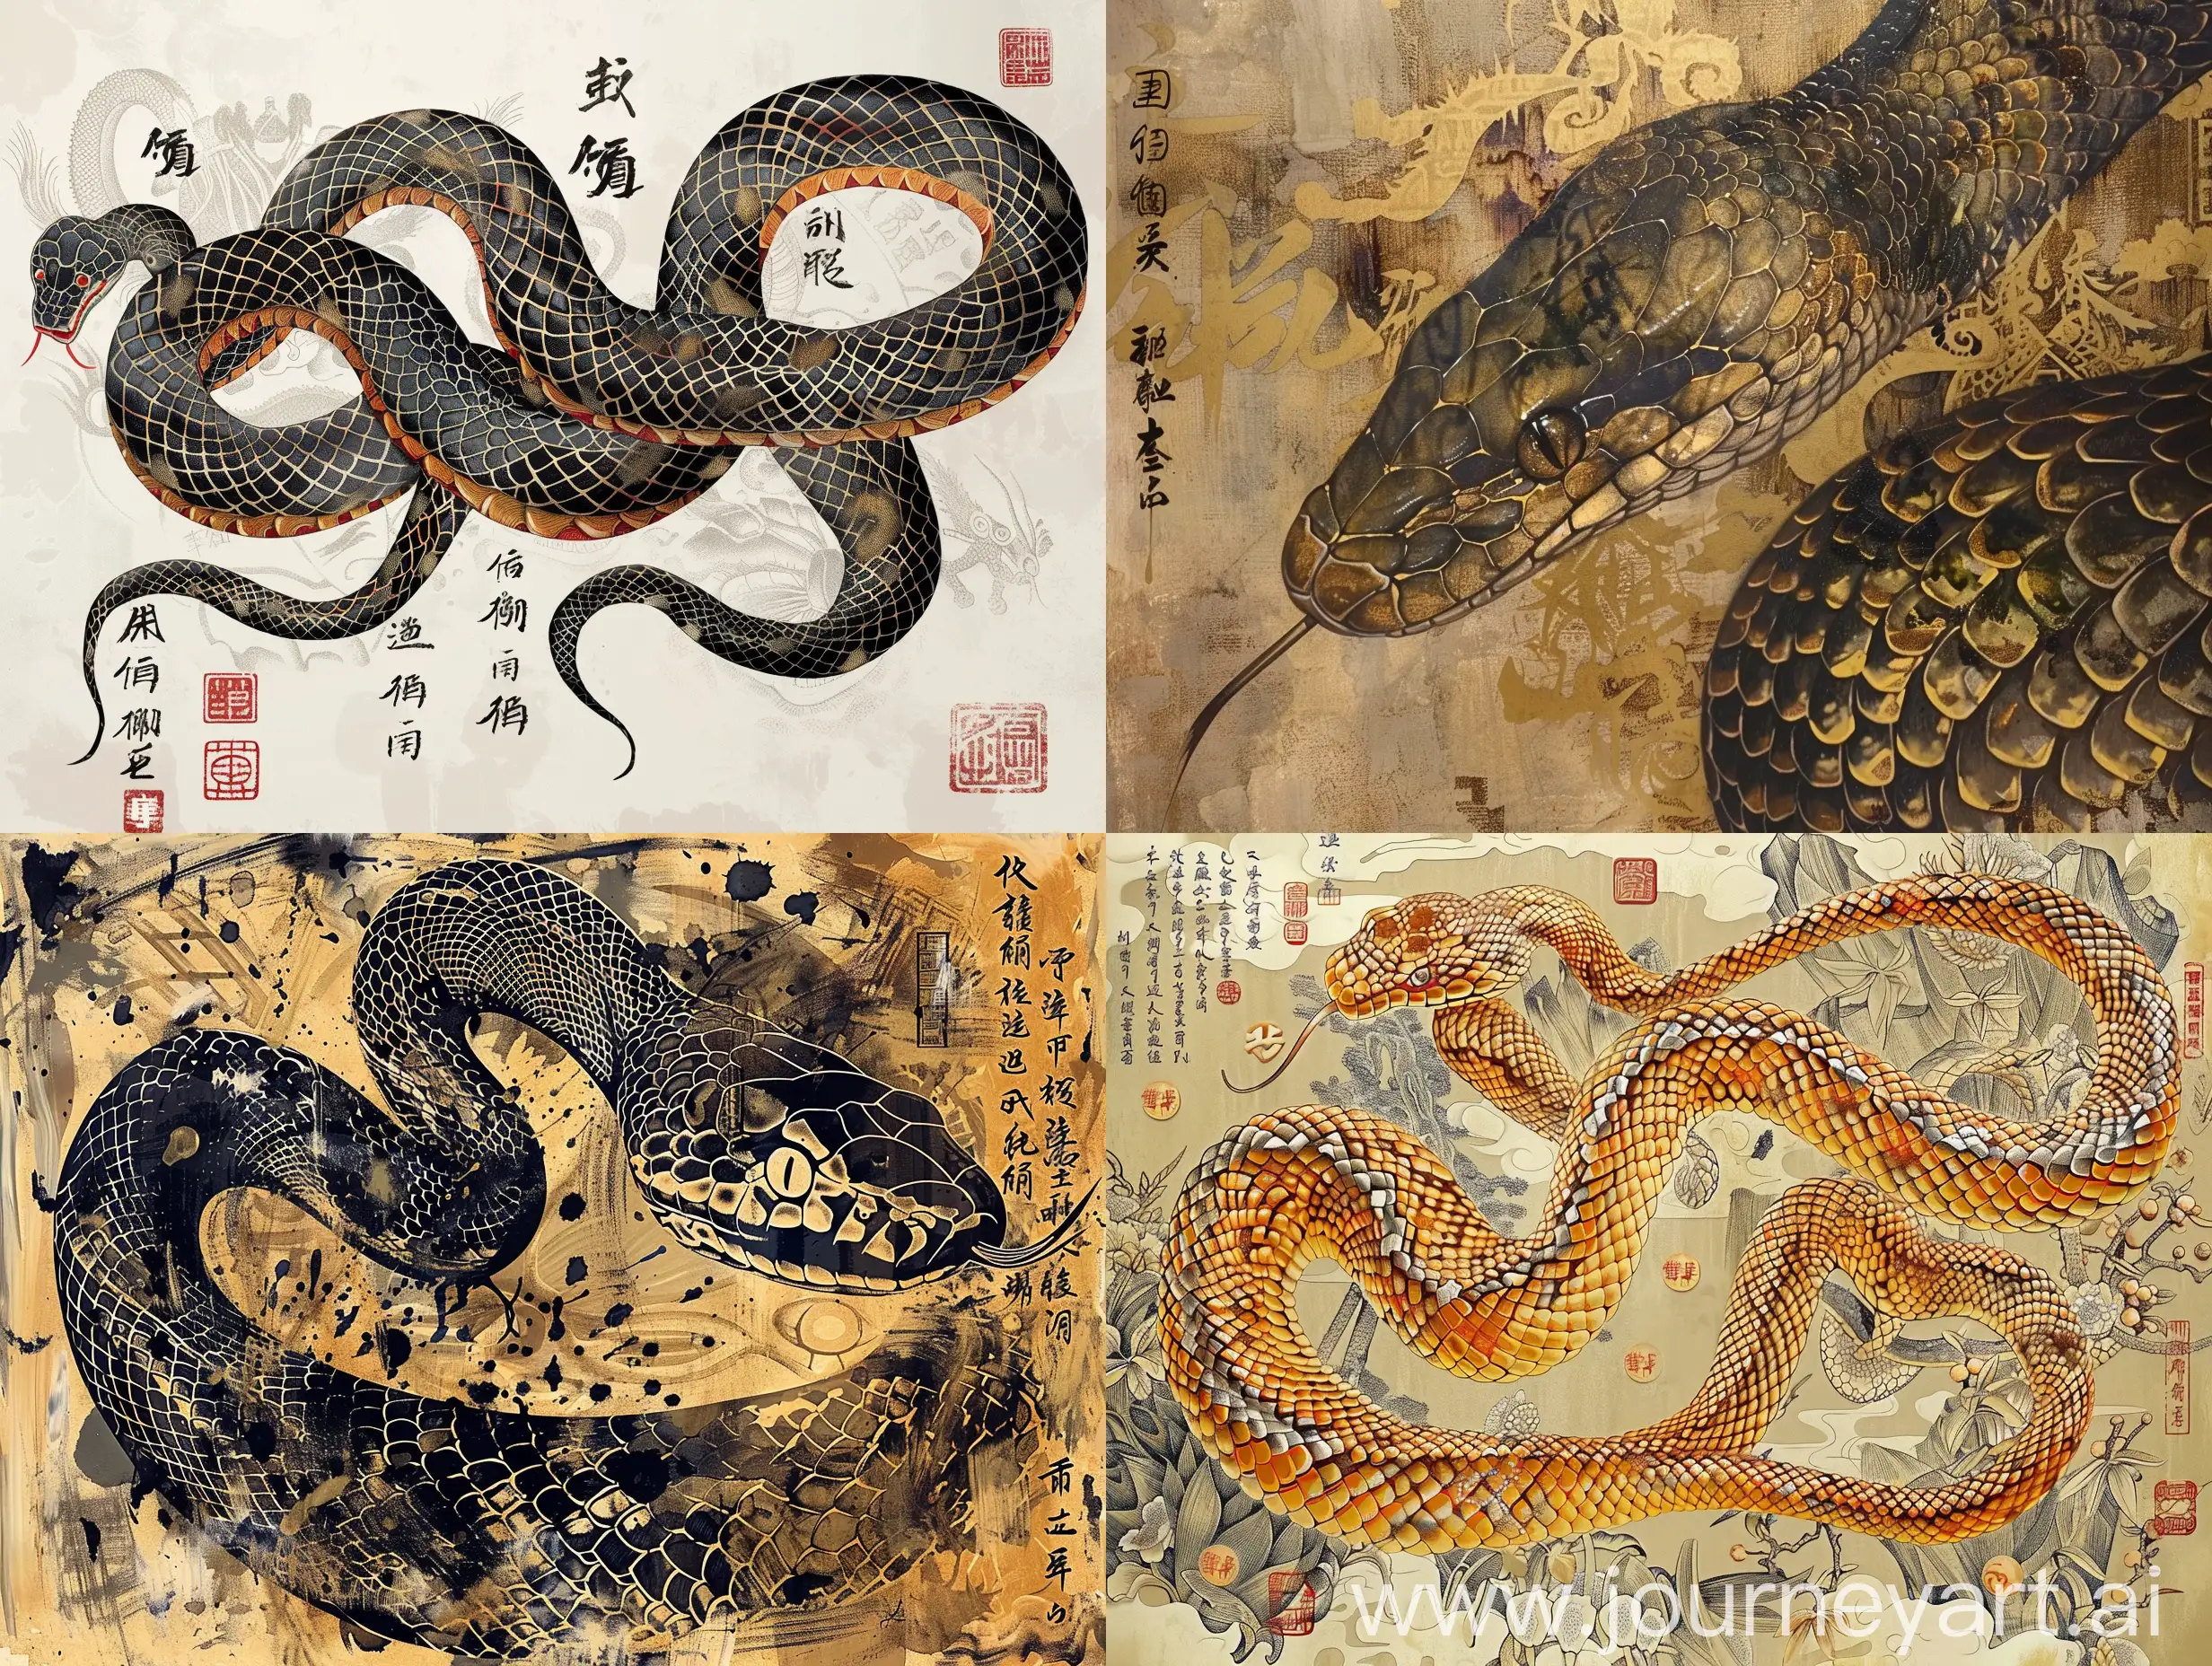 Enchanting-Chinese-Fantasy-Snake-Painting-with-Wealth-Symbols